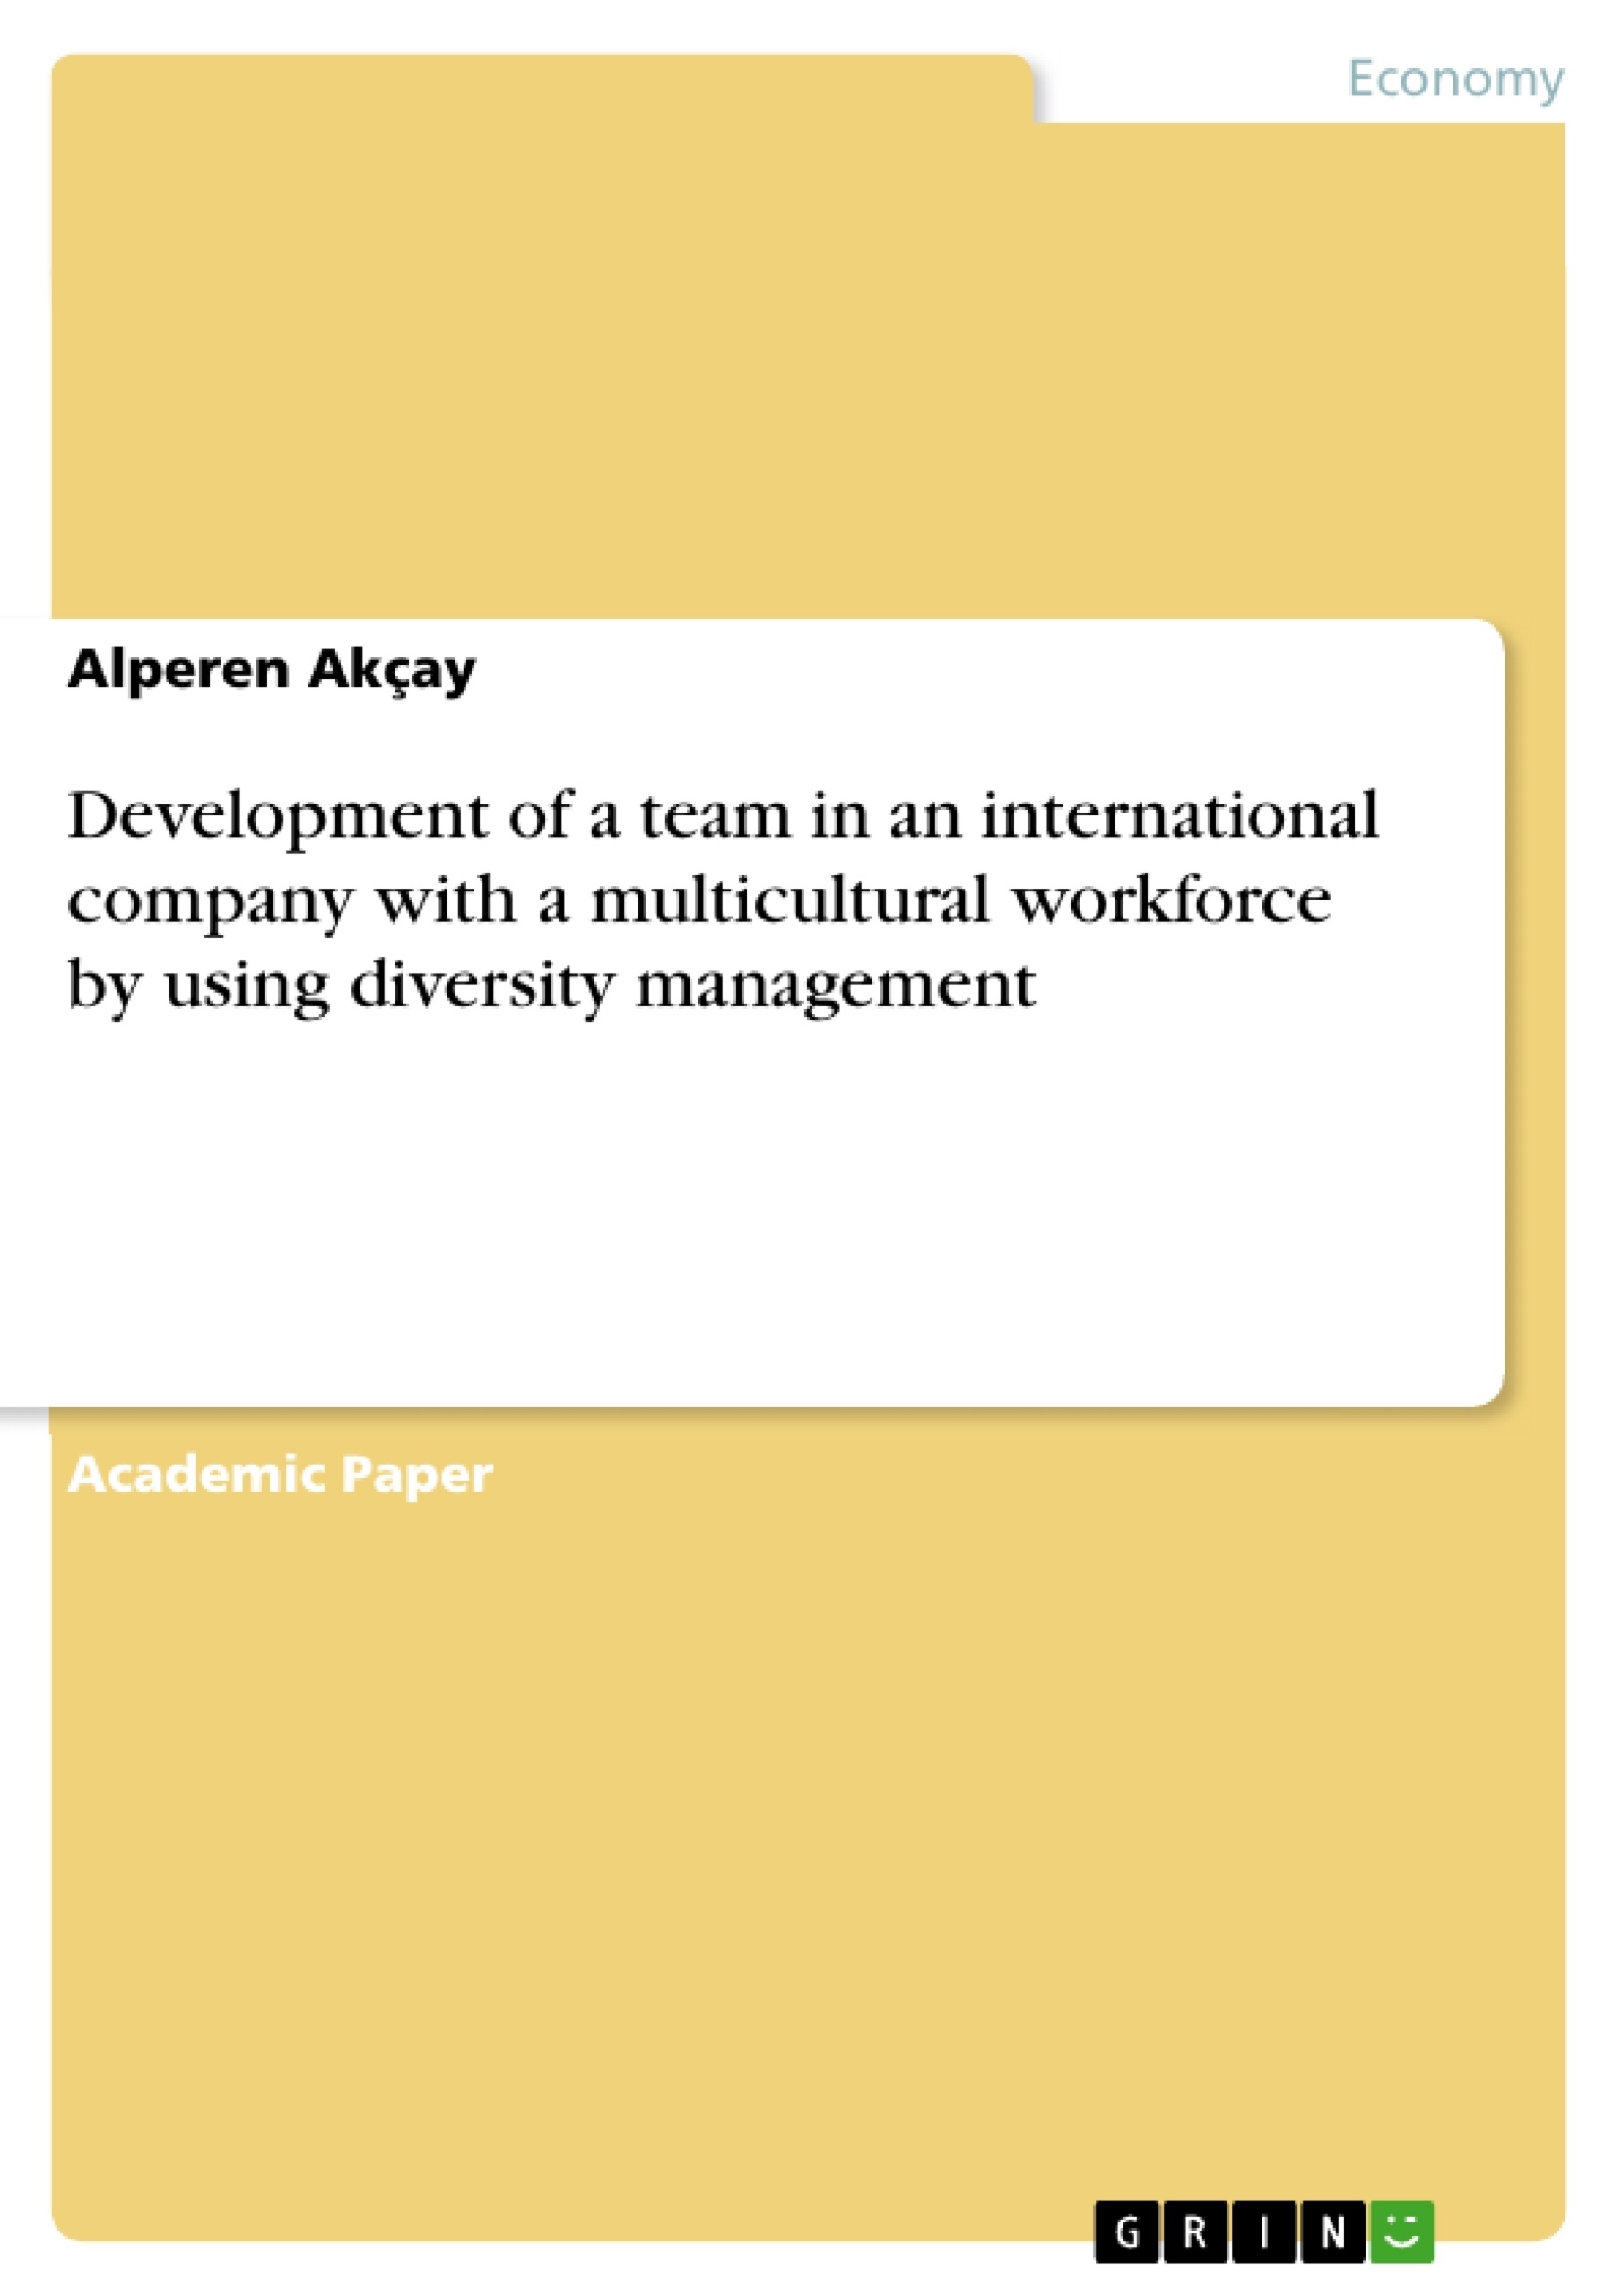 Title: Development of a team in an international company with a multicultural workforce by using diversity management